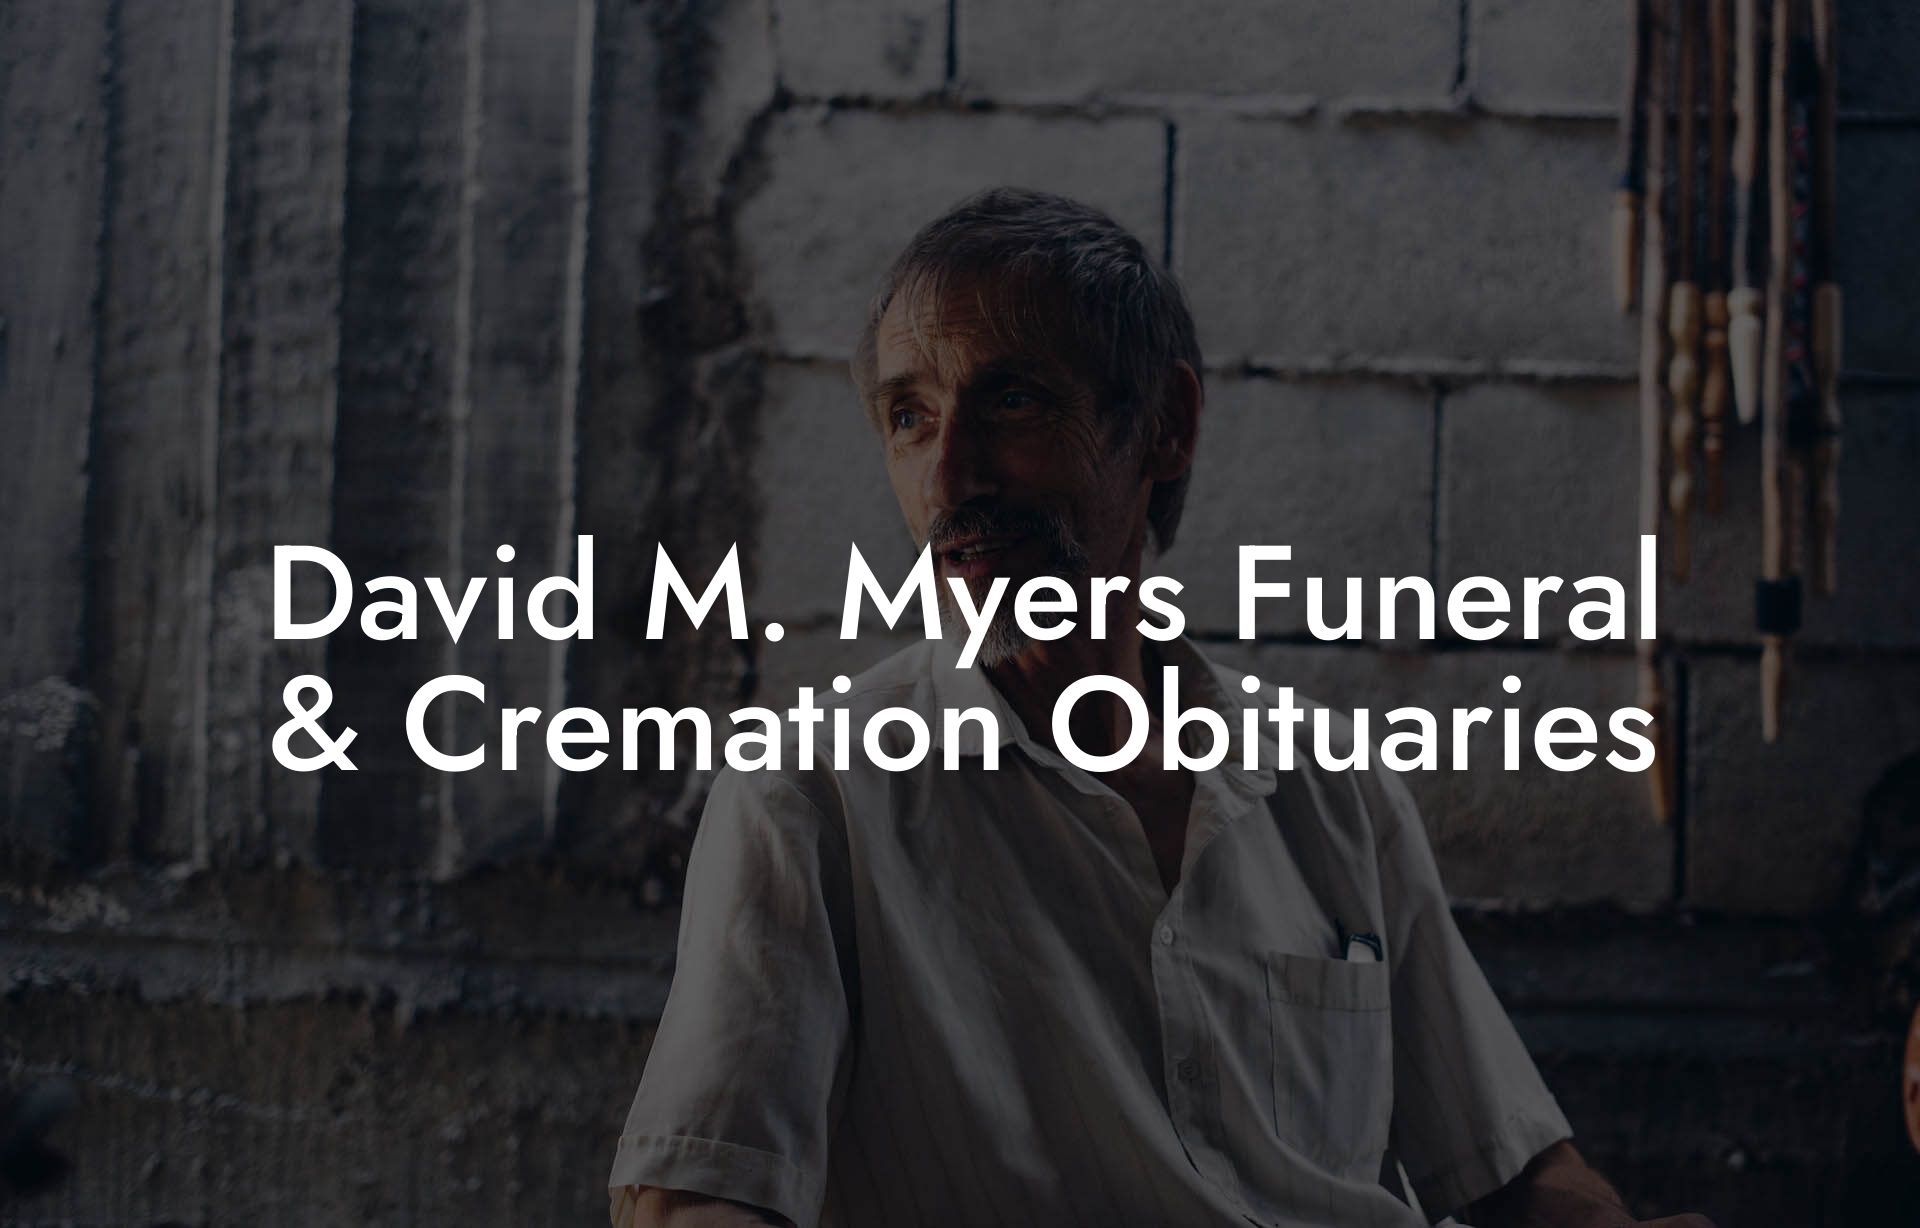 David M. Myers Funeral & Cremation Obituaries